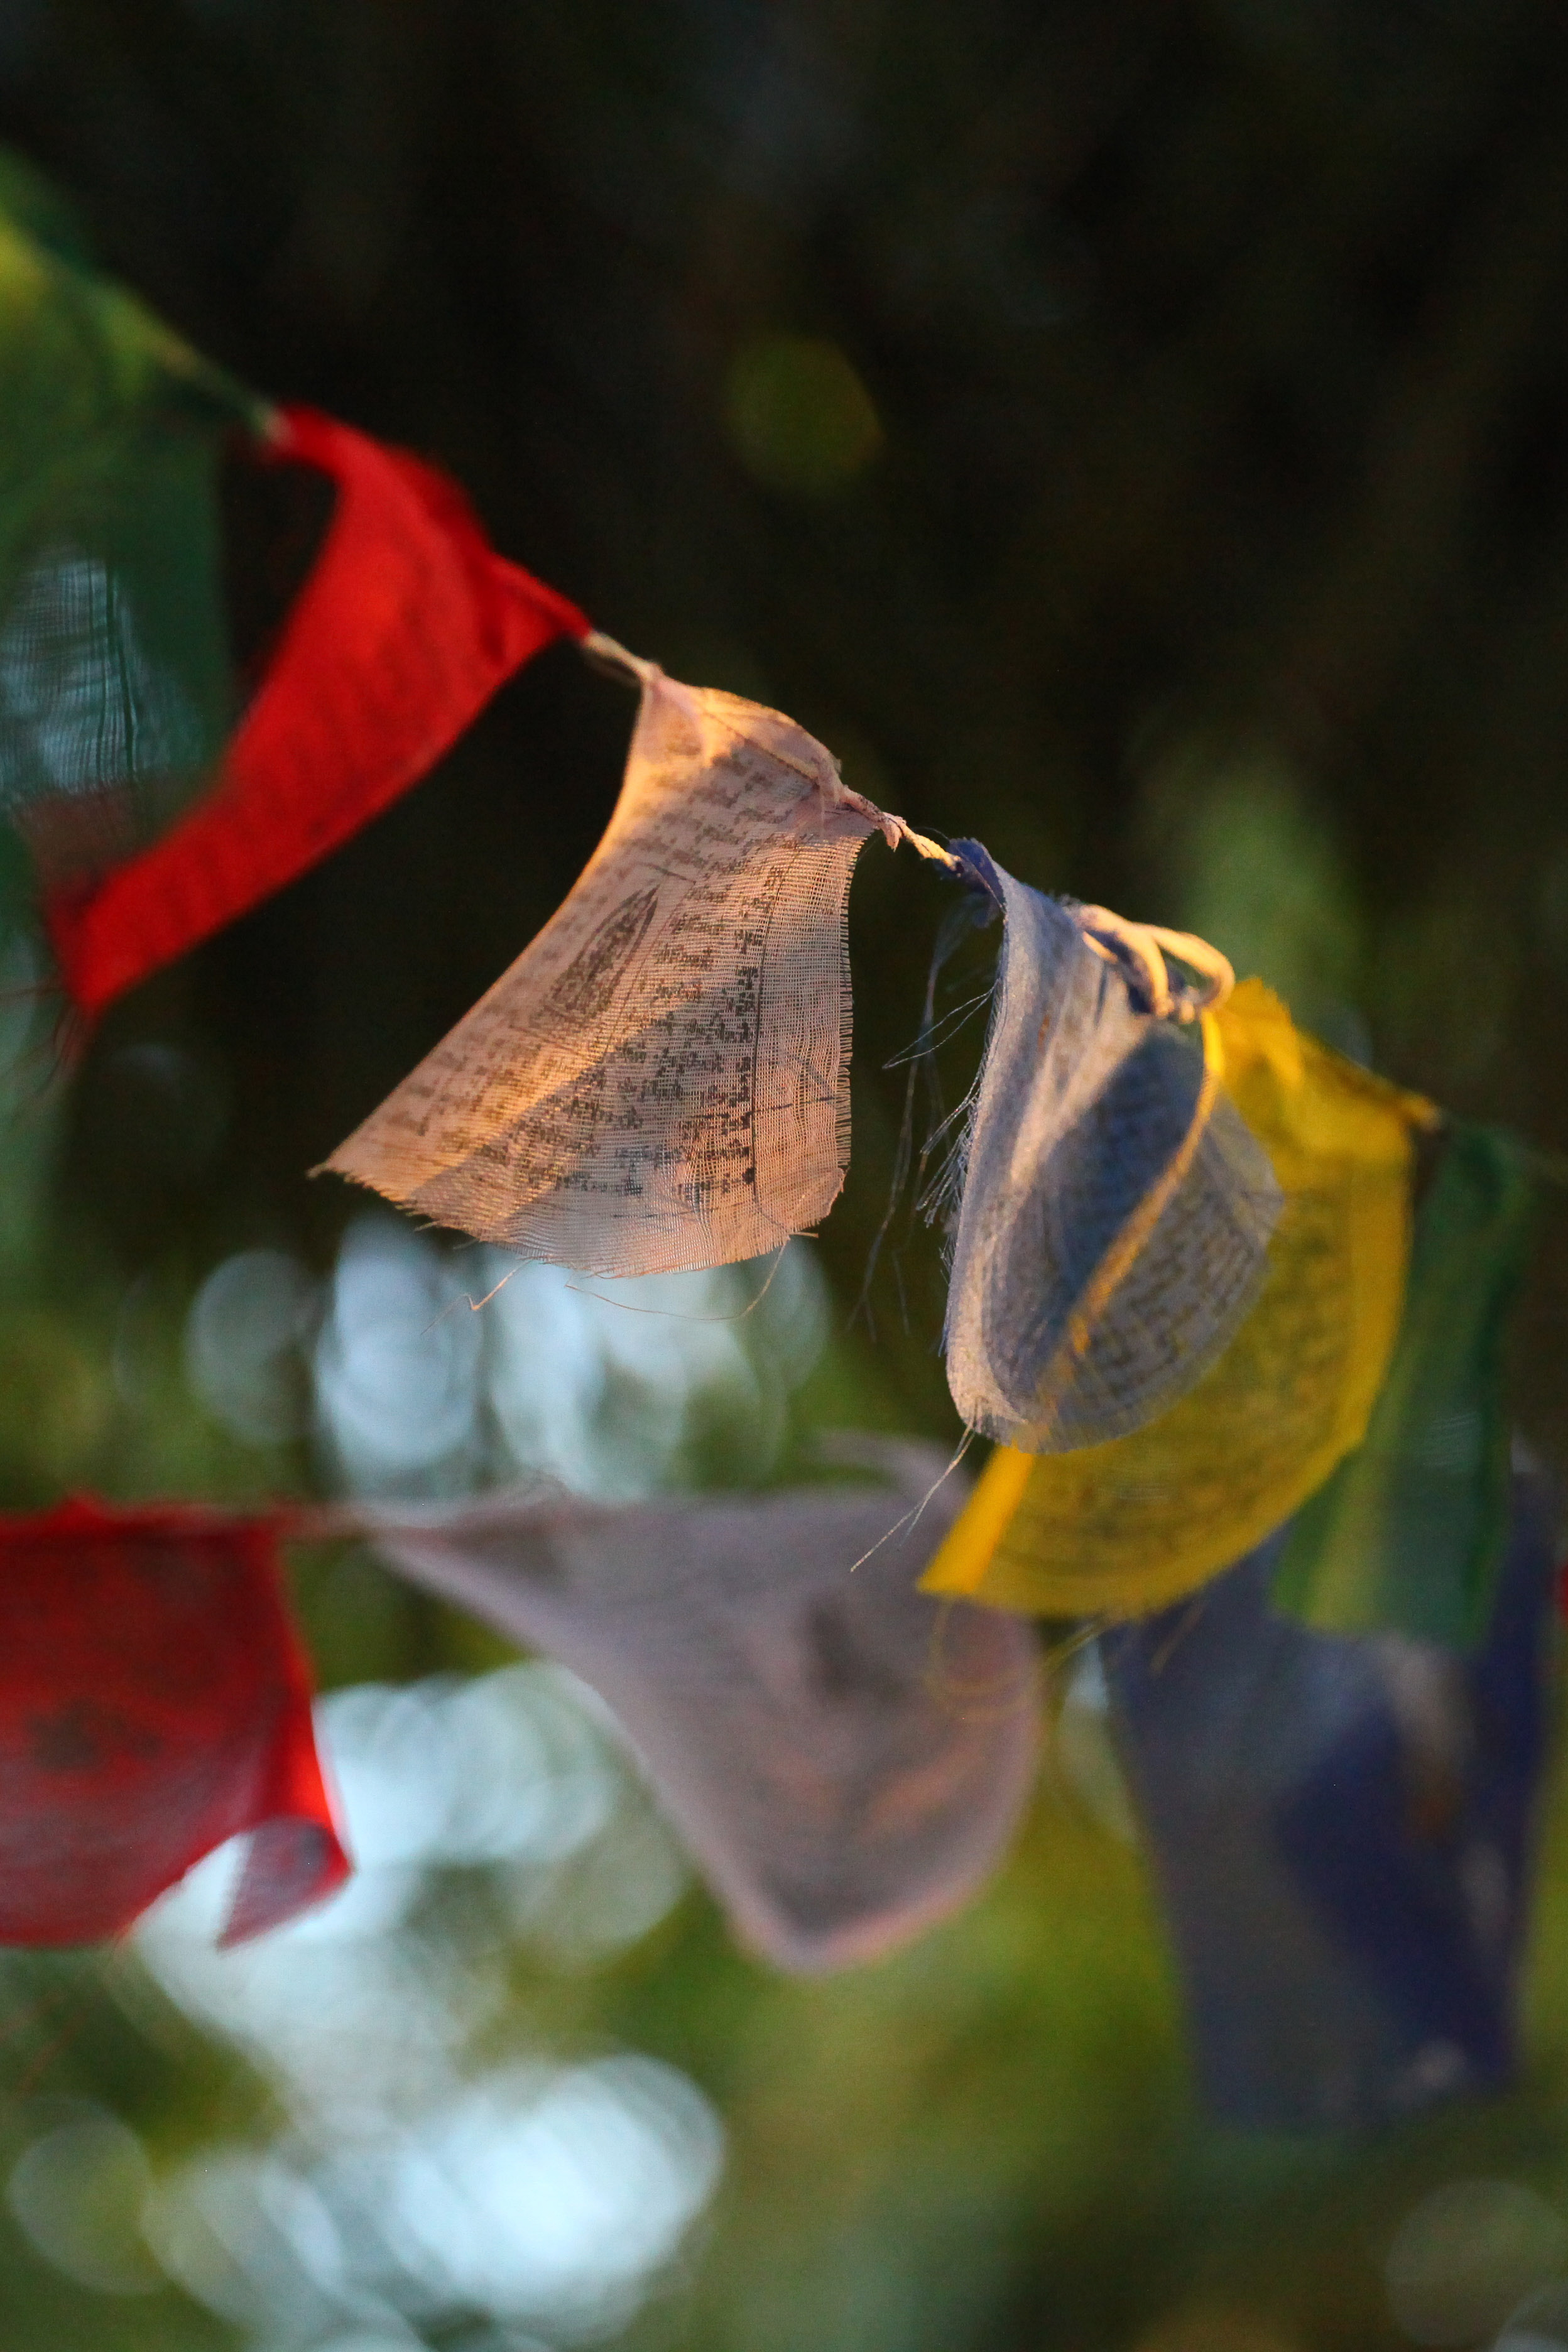 Prayer flags dancing in the wind between the palm trees. Photo: Charlie Malmqvist.